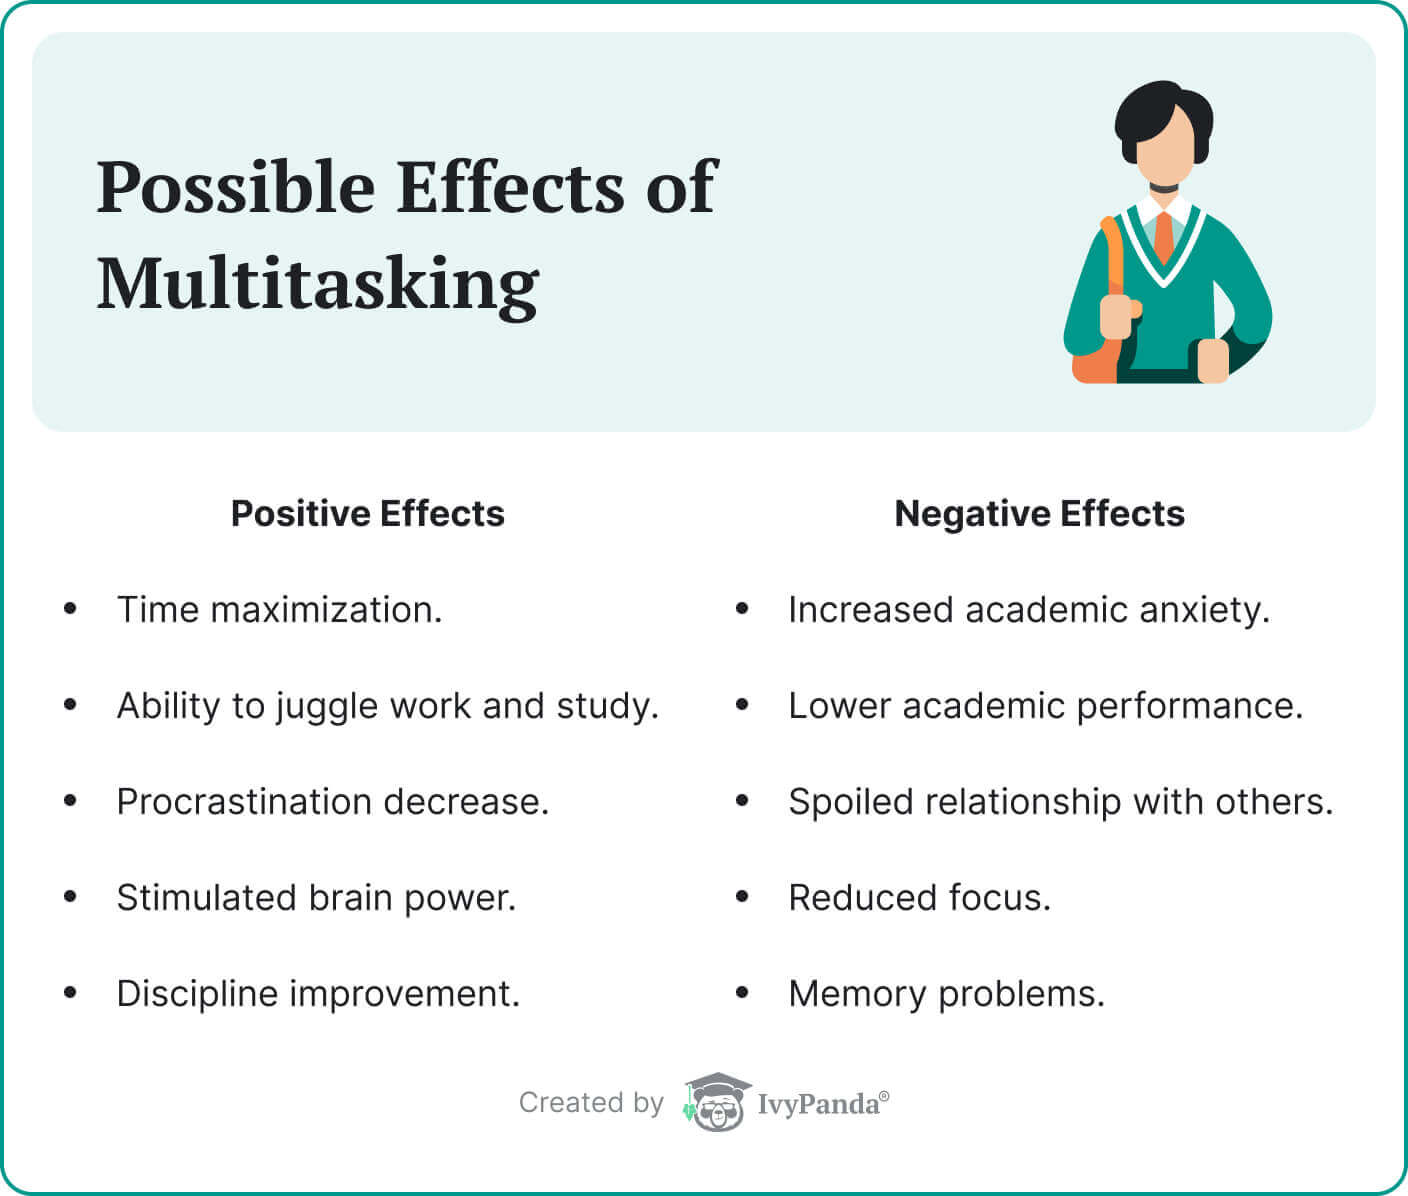 The picture provides negative and positive effects of multitasking.